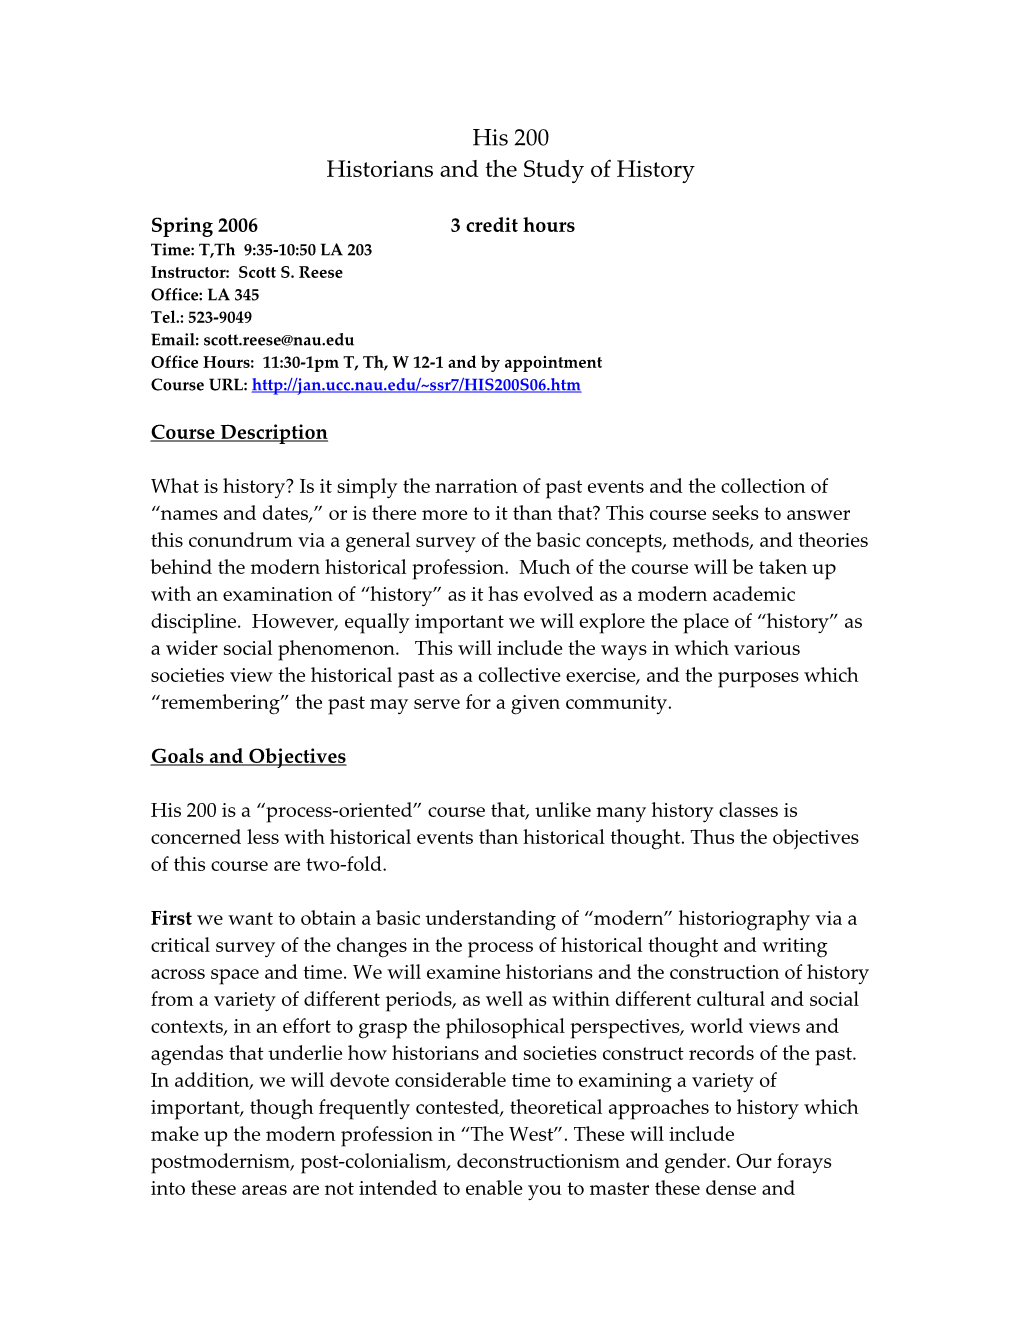 Historians and the Study of History